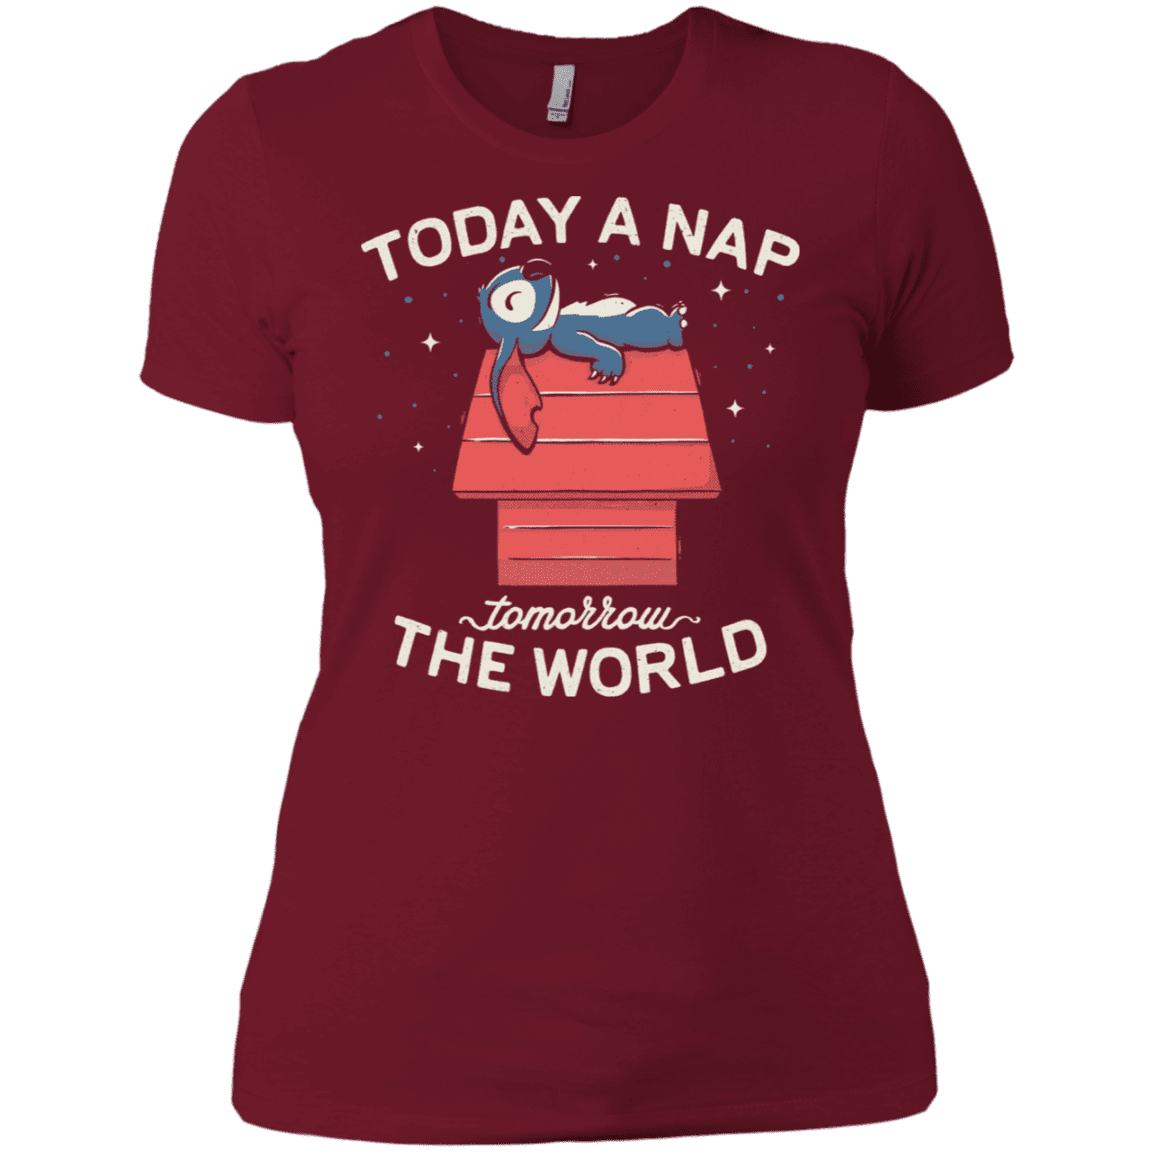 T-Shirts Scarlet / X-Small Today a Nap Tomorrow the World Women's Premium T-Shirt